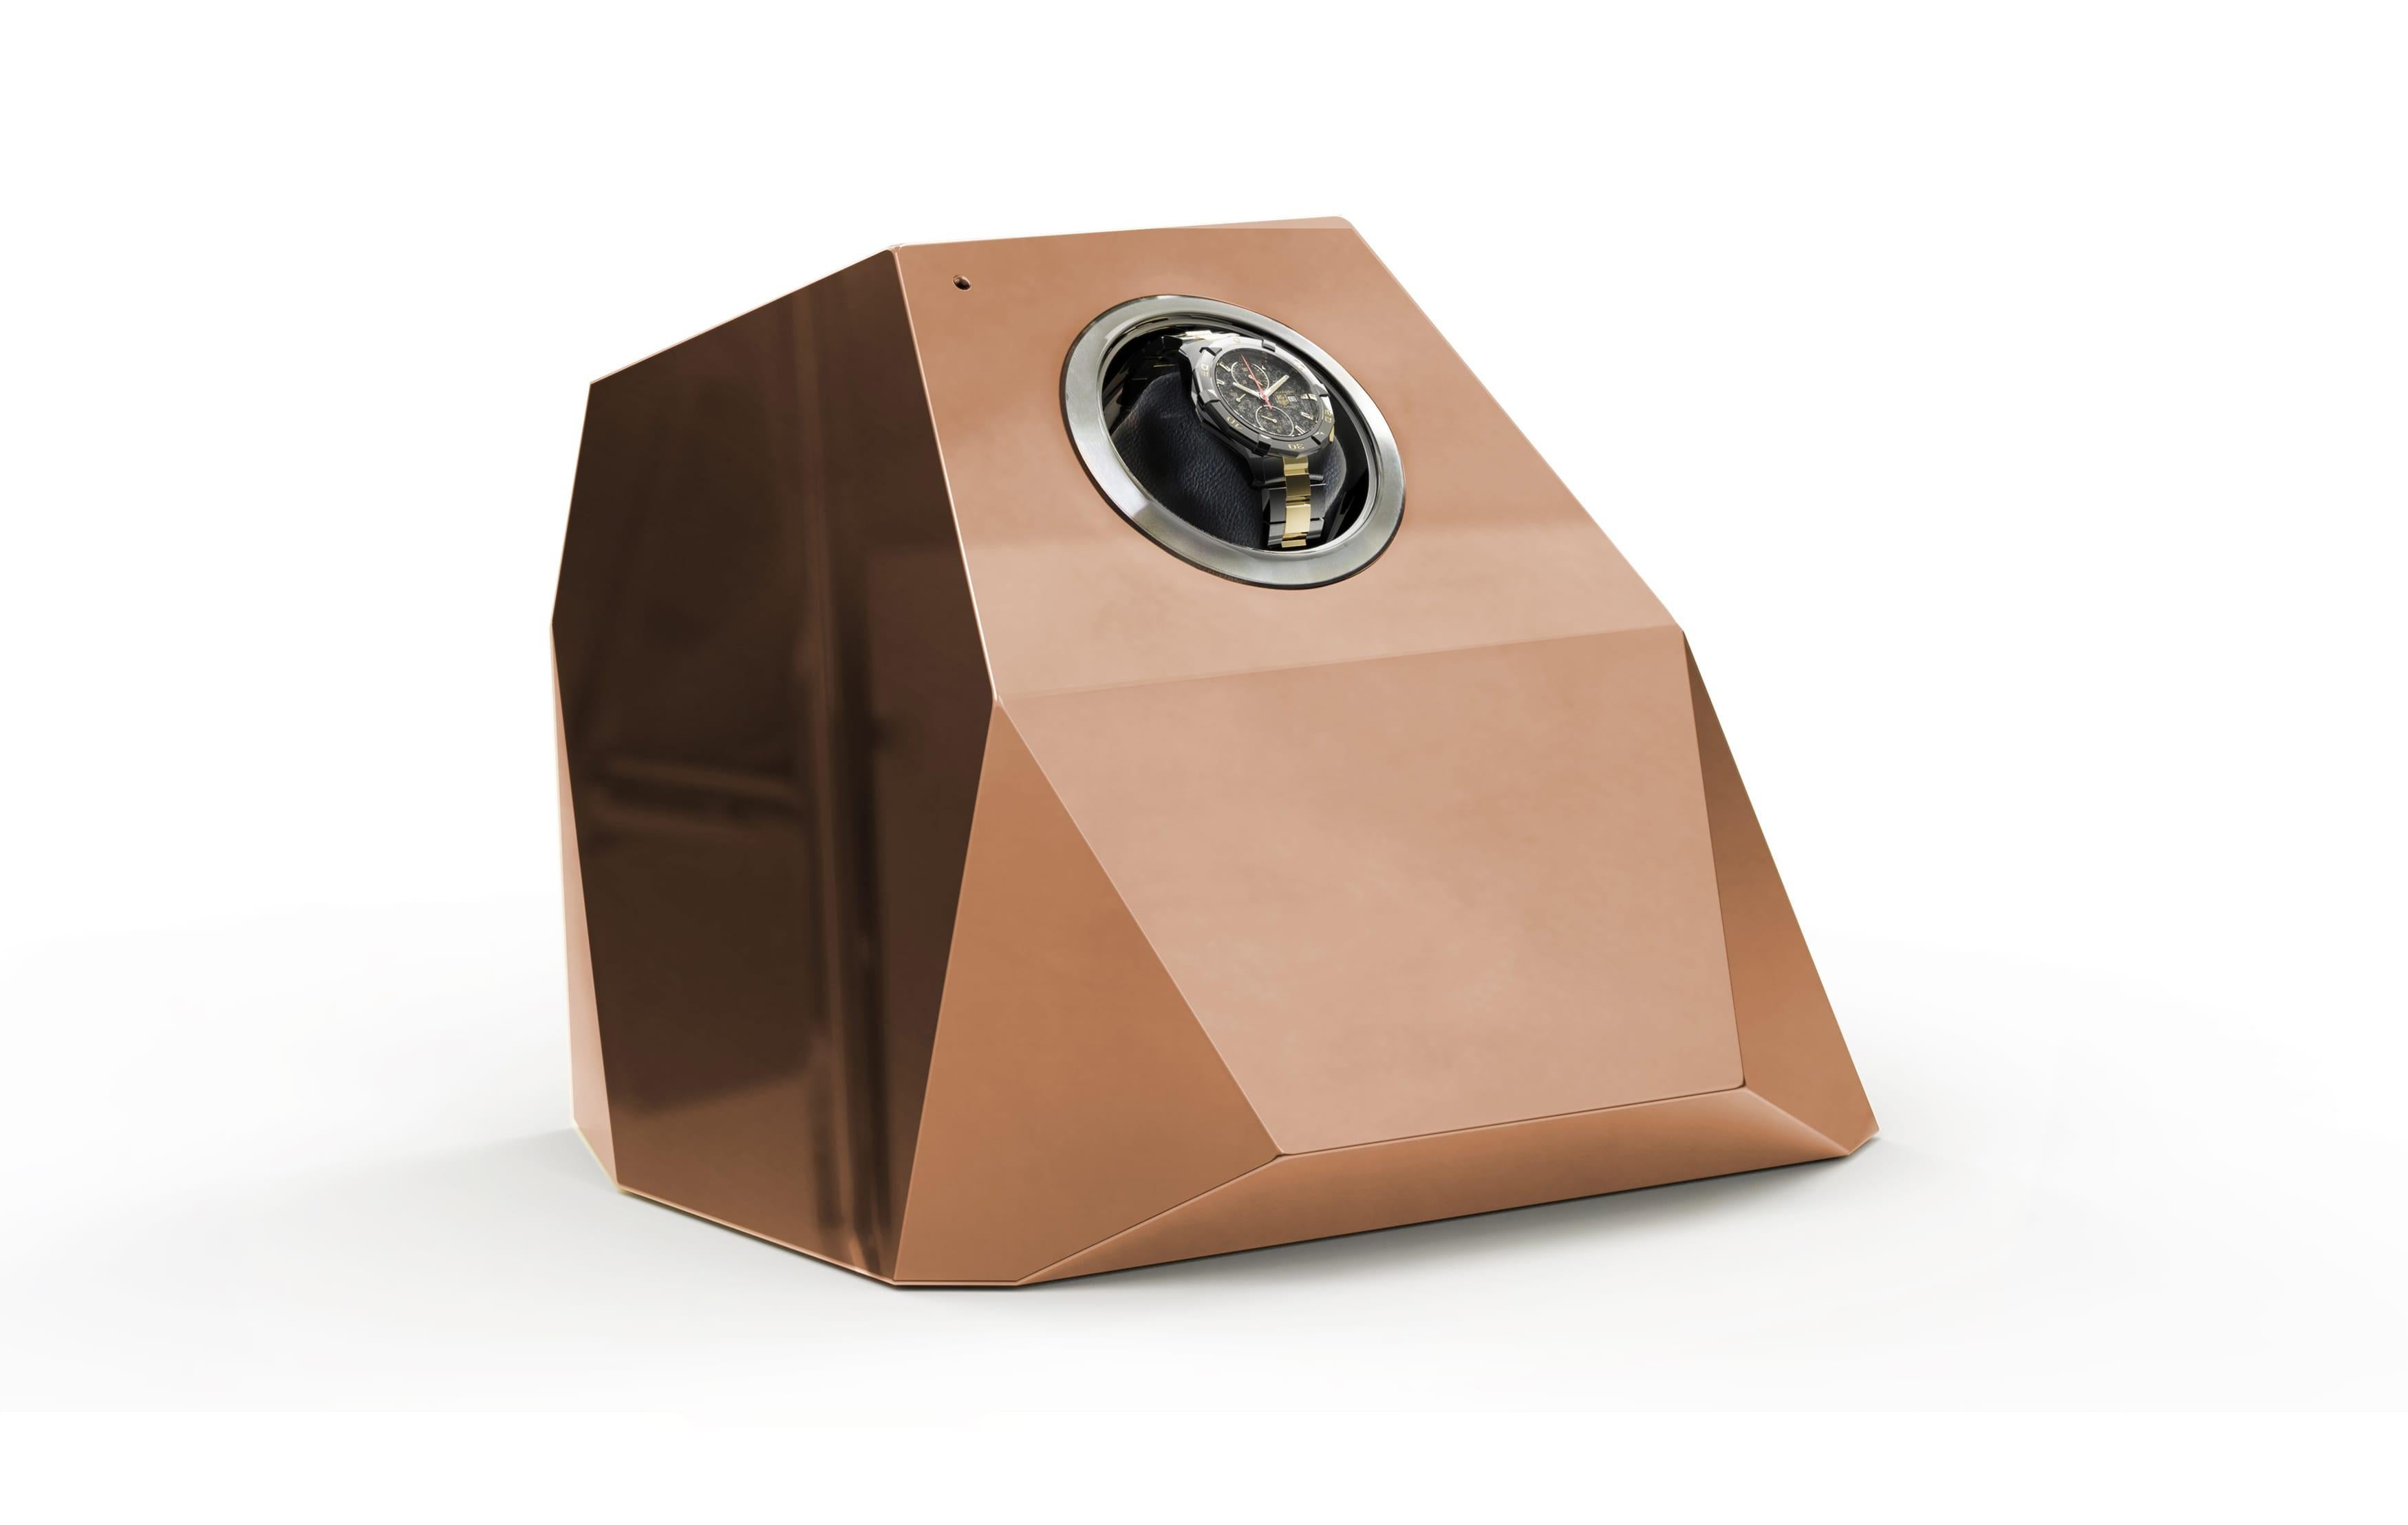 The Diamond design piece reinterprets the quintessential diamond shape throughout contemporary design, a beautiful outcome of architectural thinking with elegant faceted lines. A single module watch winder that provides proper care and secure